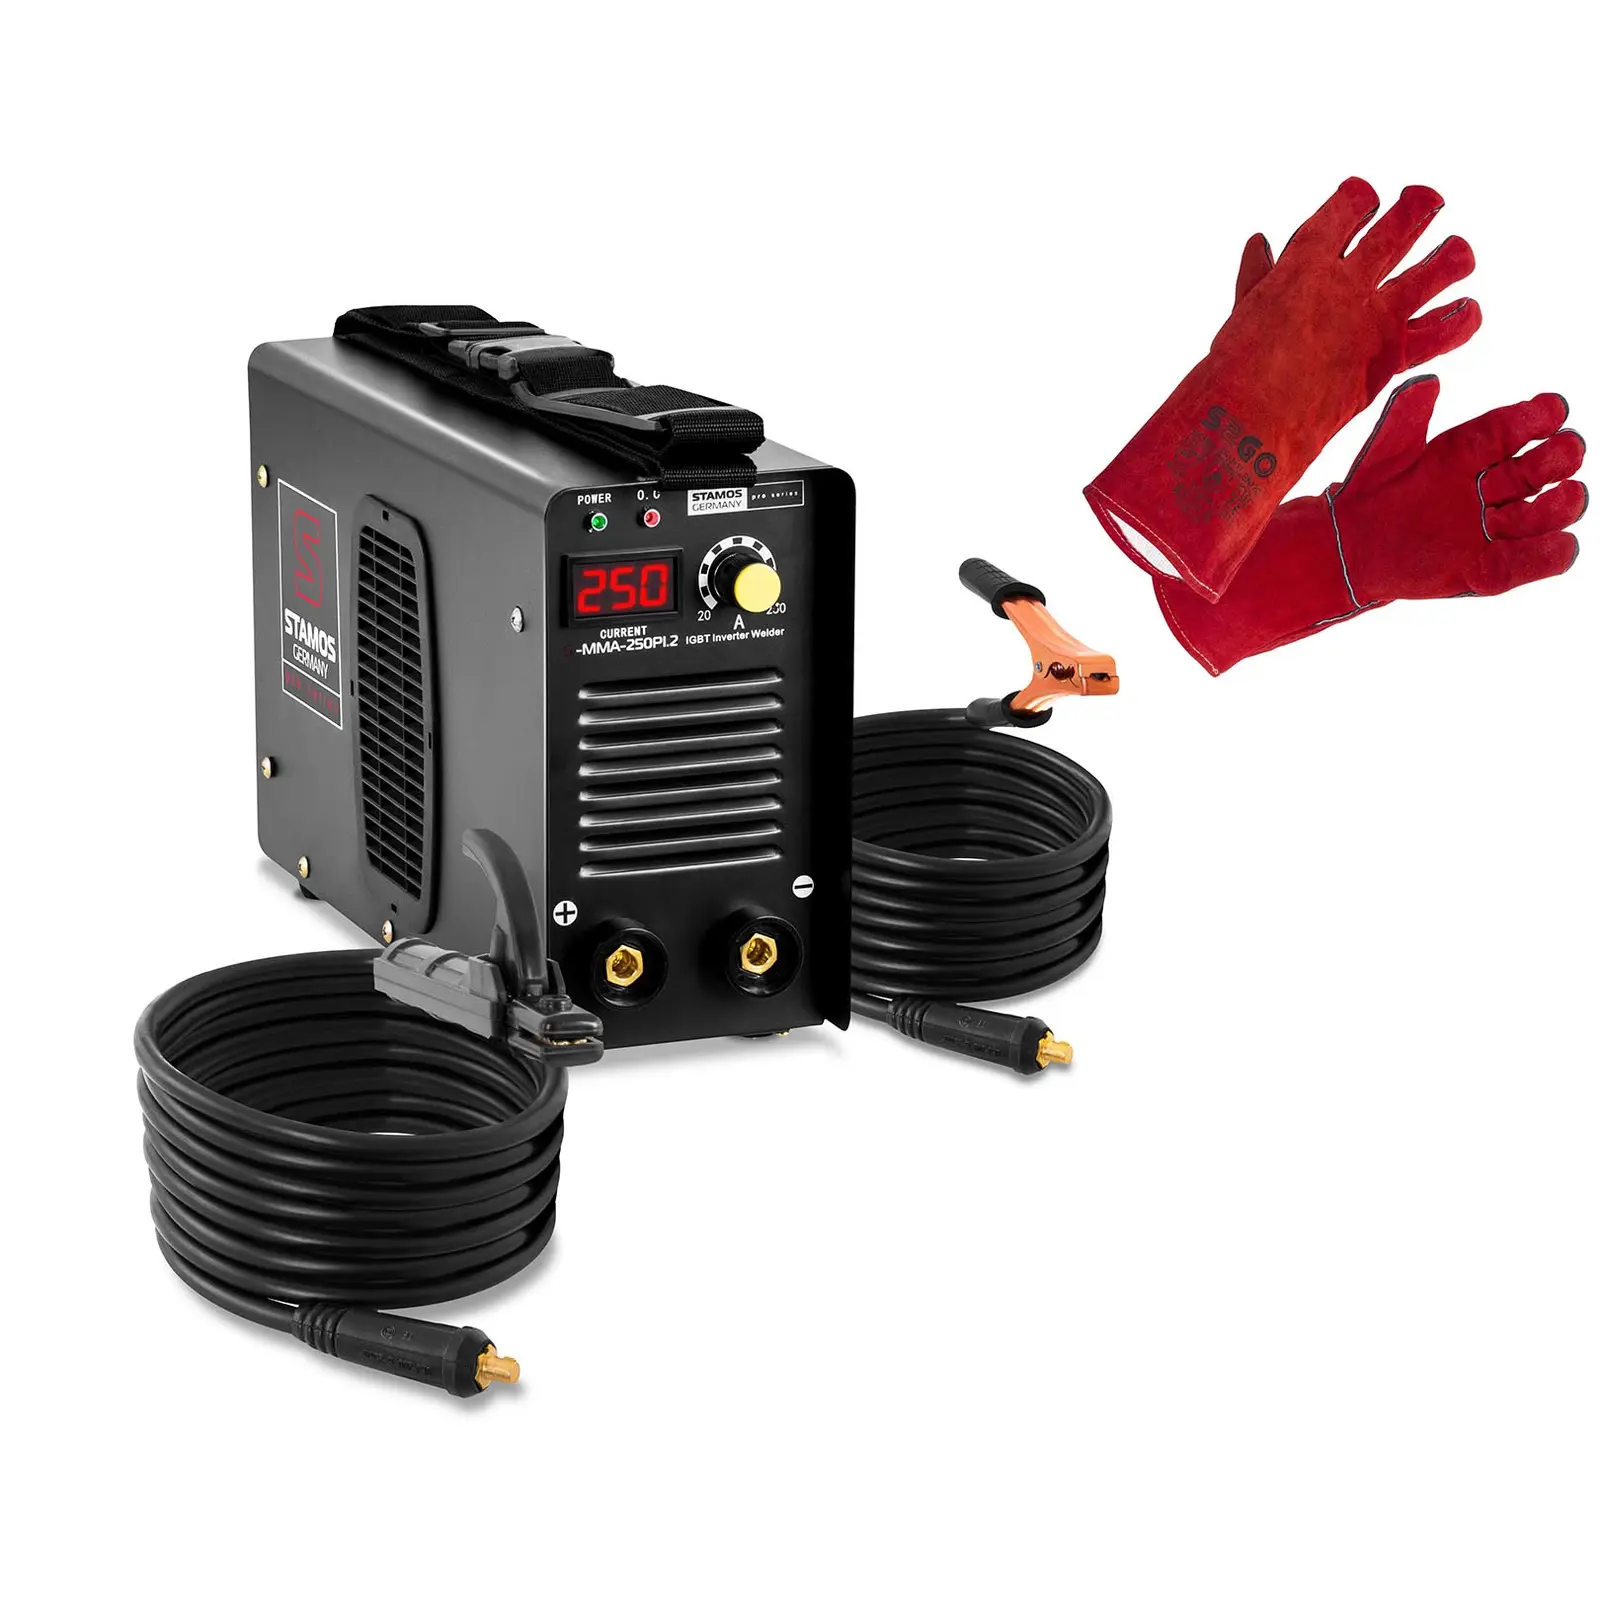 Set: Electrode Welding Machine with Welding Gloves - 250 A - 8 m cable - hot start